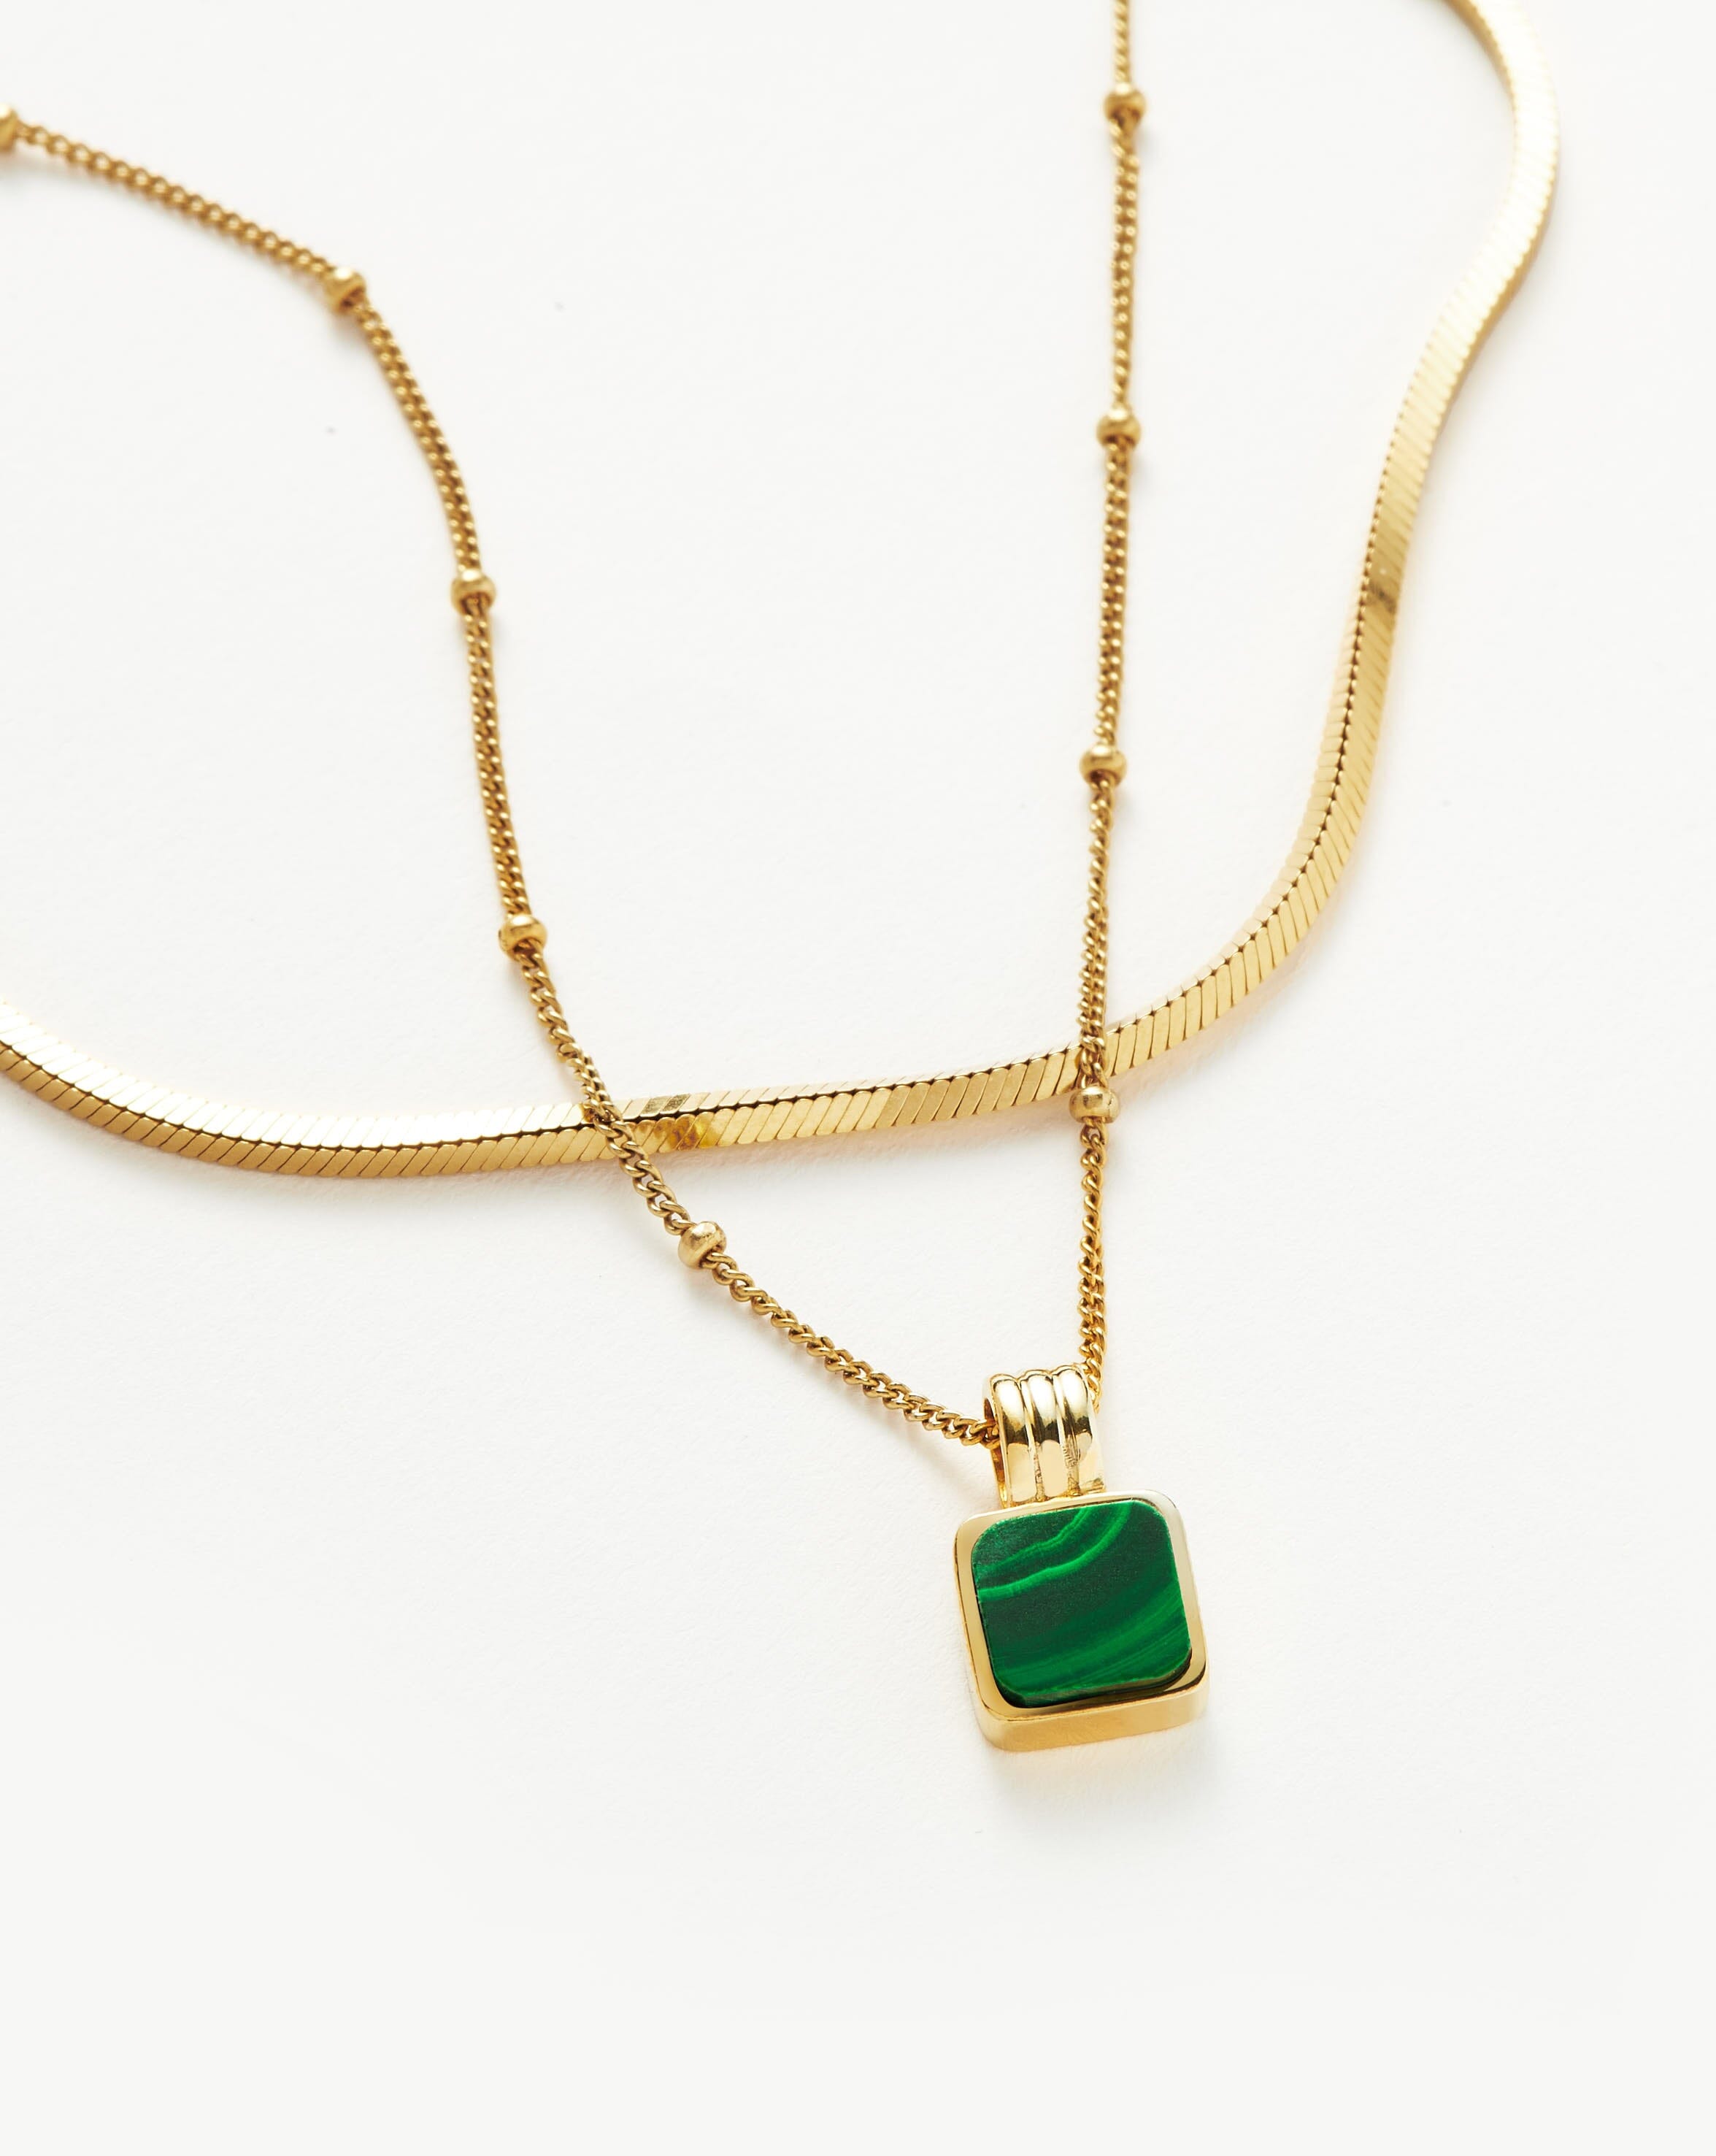 Iconic Lucy Williams Malachite Necklace Set | 18ct Gold Plated Vermeil/Malachite Necklaces Missoma 